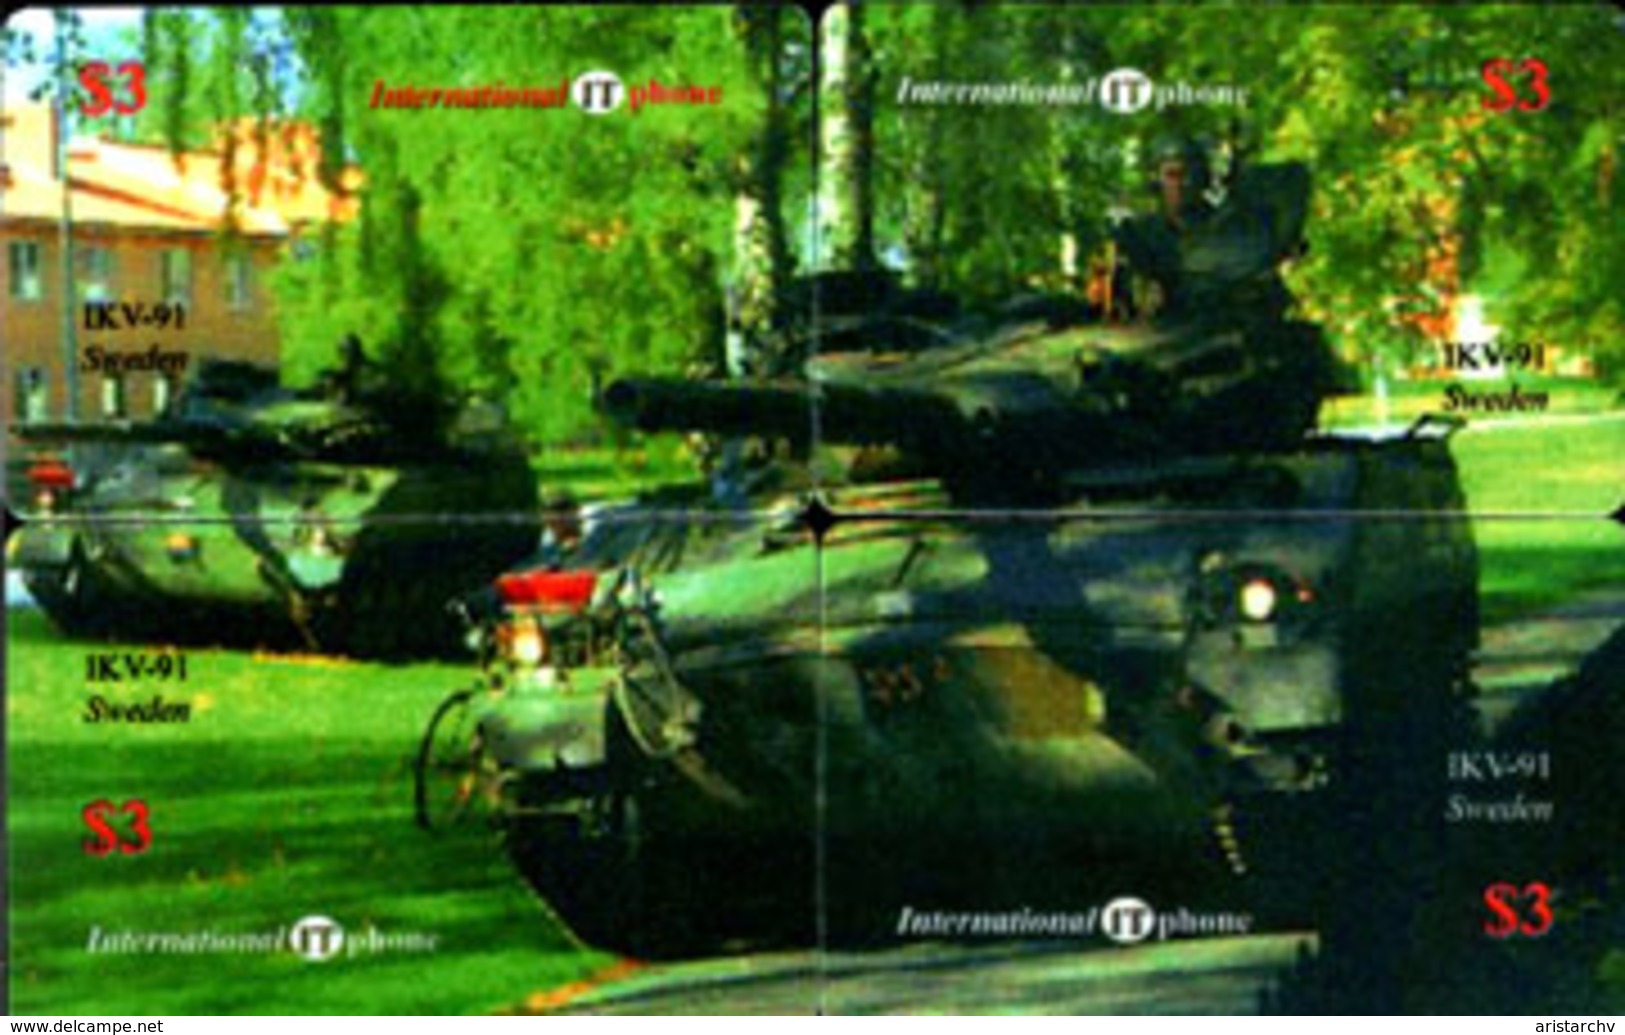 TANK IKV-91 PUZZLE OF 4 PHONE CARDS - Army